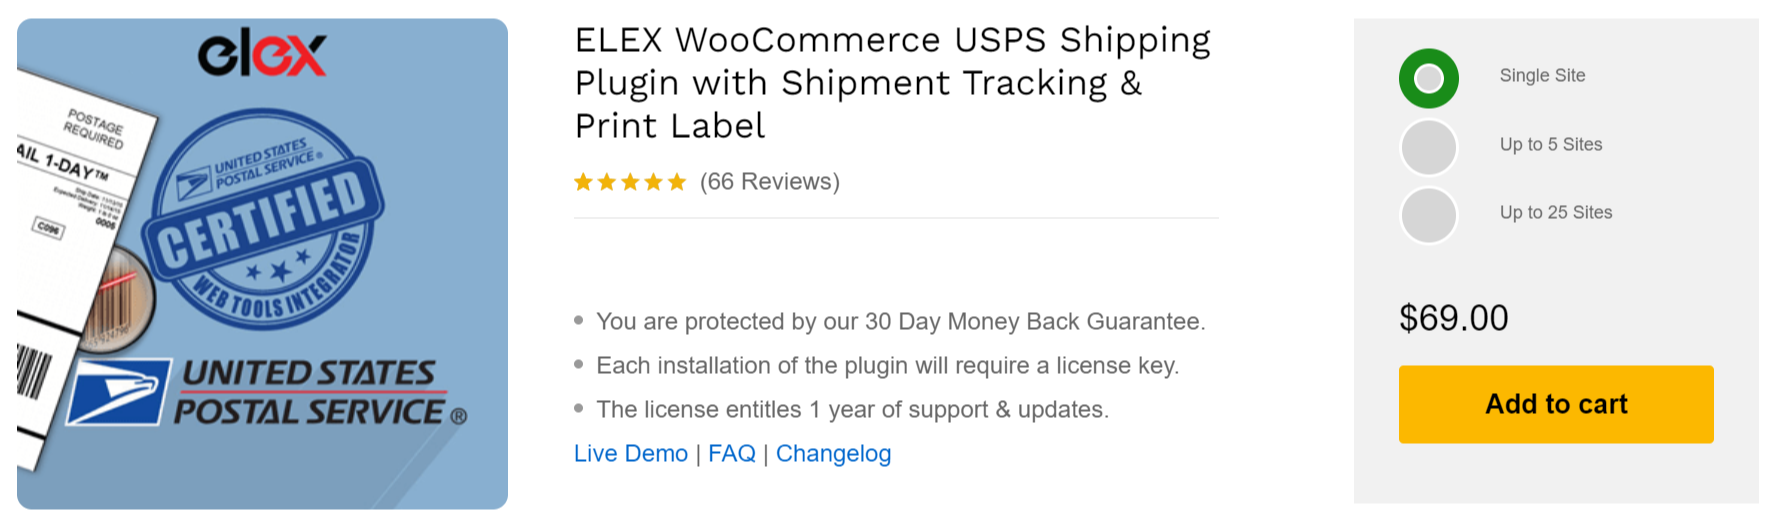 How to add a Shipping Calculator on the Product Page of your WooCommerce Website?